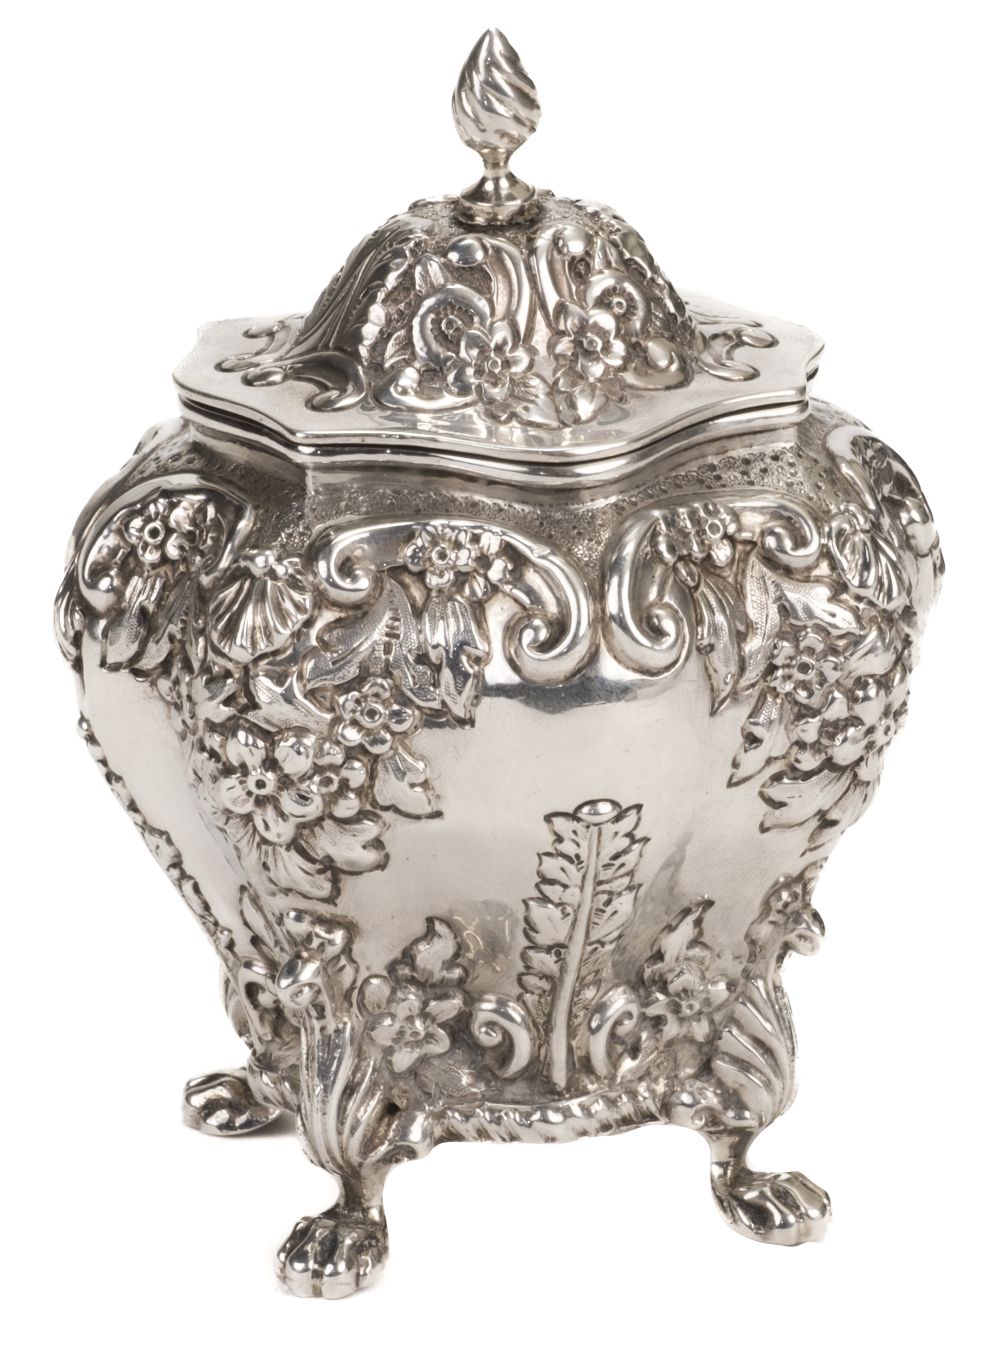 Tea Caddy. A silver tea caddy by George Nathan and Ridley Hayes, Chester 1902